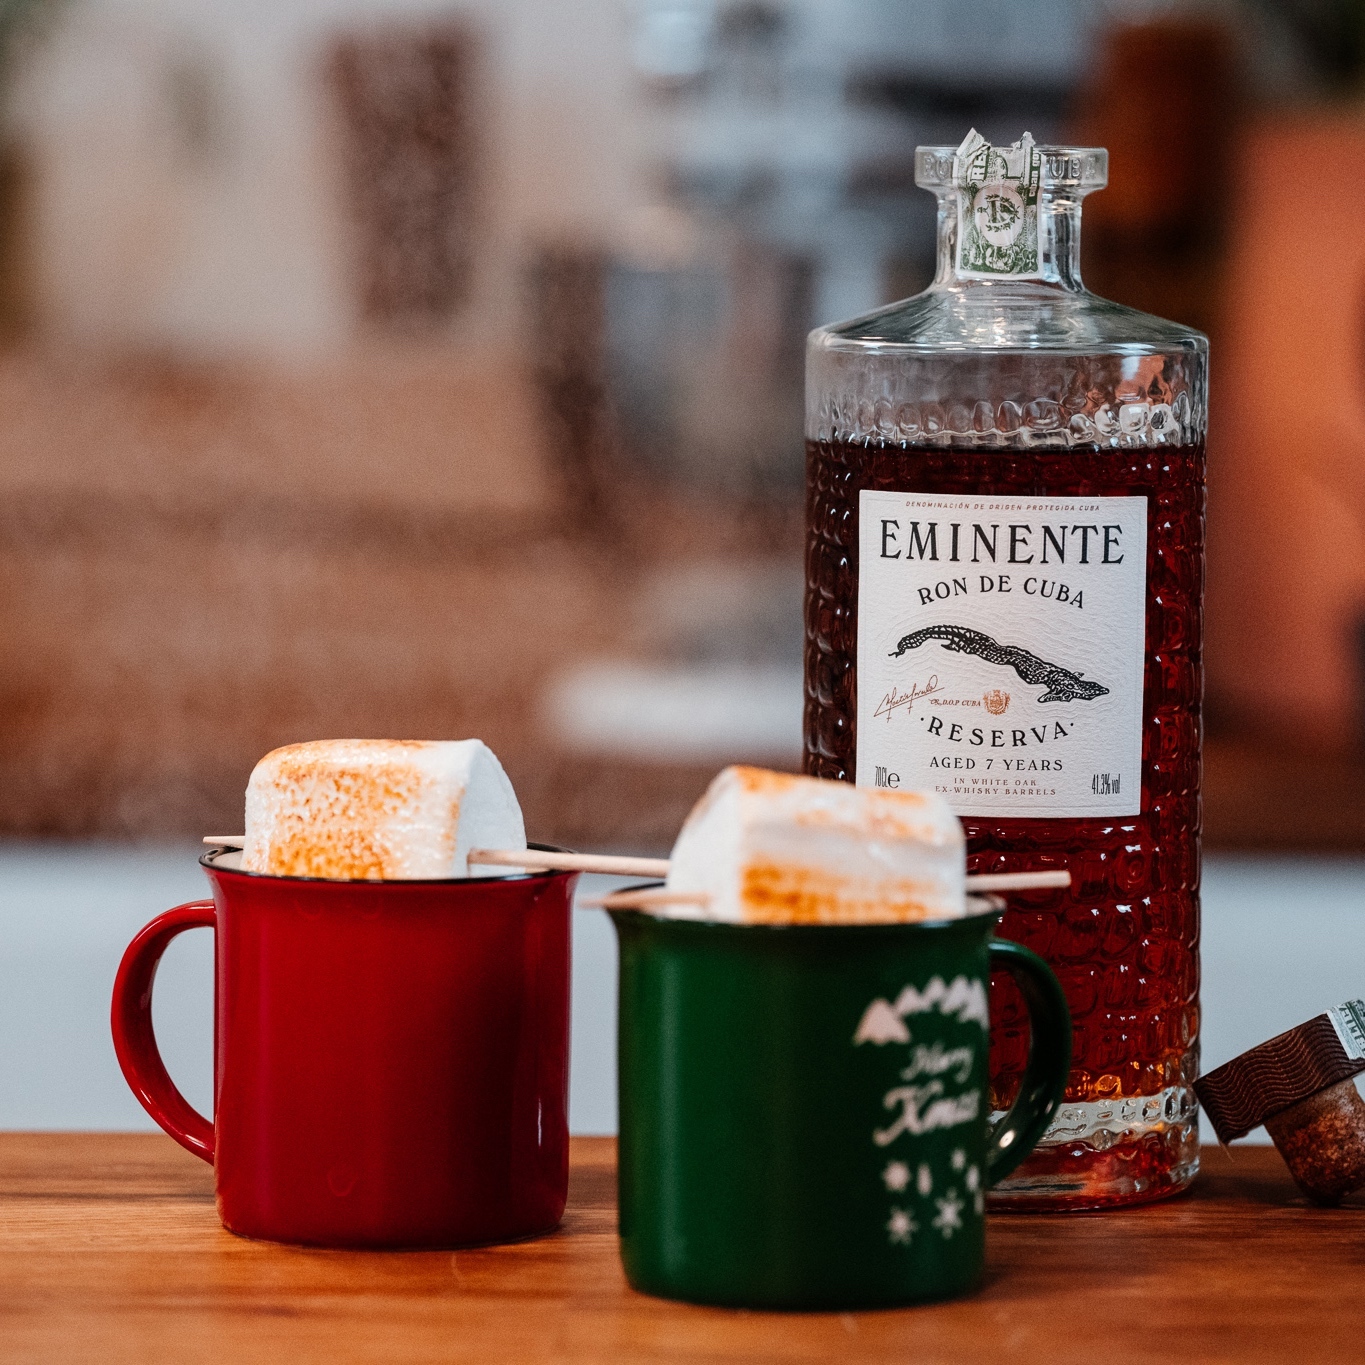 Clos19 on X: Make your own classic Hot Buttered Rum with Eminente Reserva  7 Years for an instant Christmas feel at home!  . .  Please drink responsibly #Rum #Christmas  /